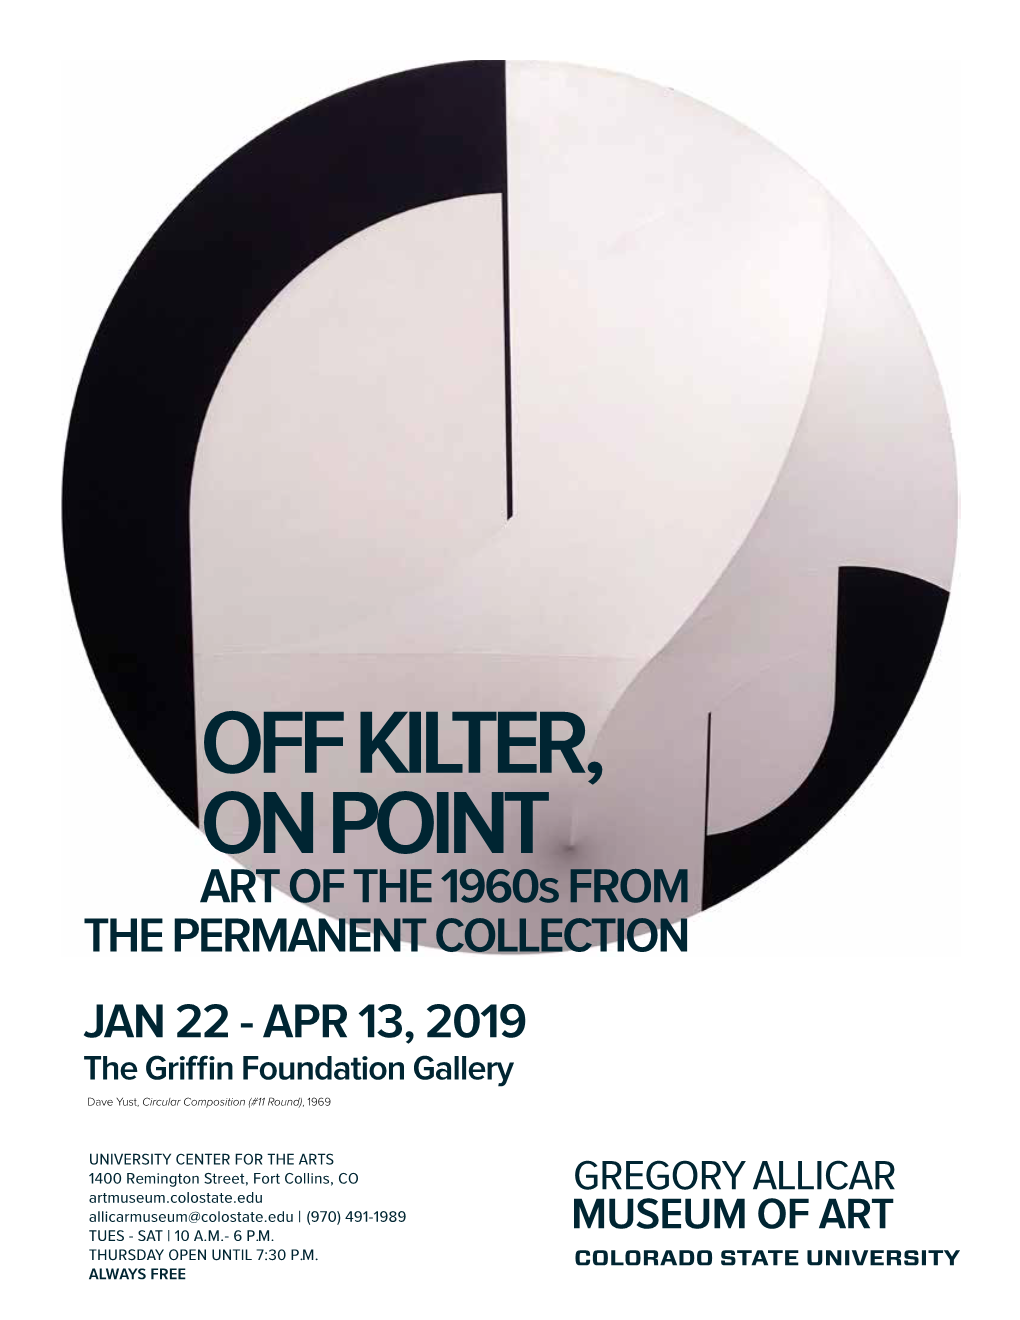 Gallery-Guide-Off-Kilter For-Web.Pdf